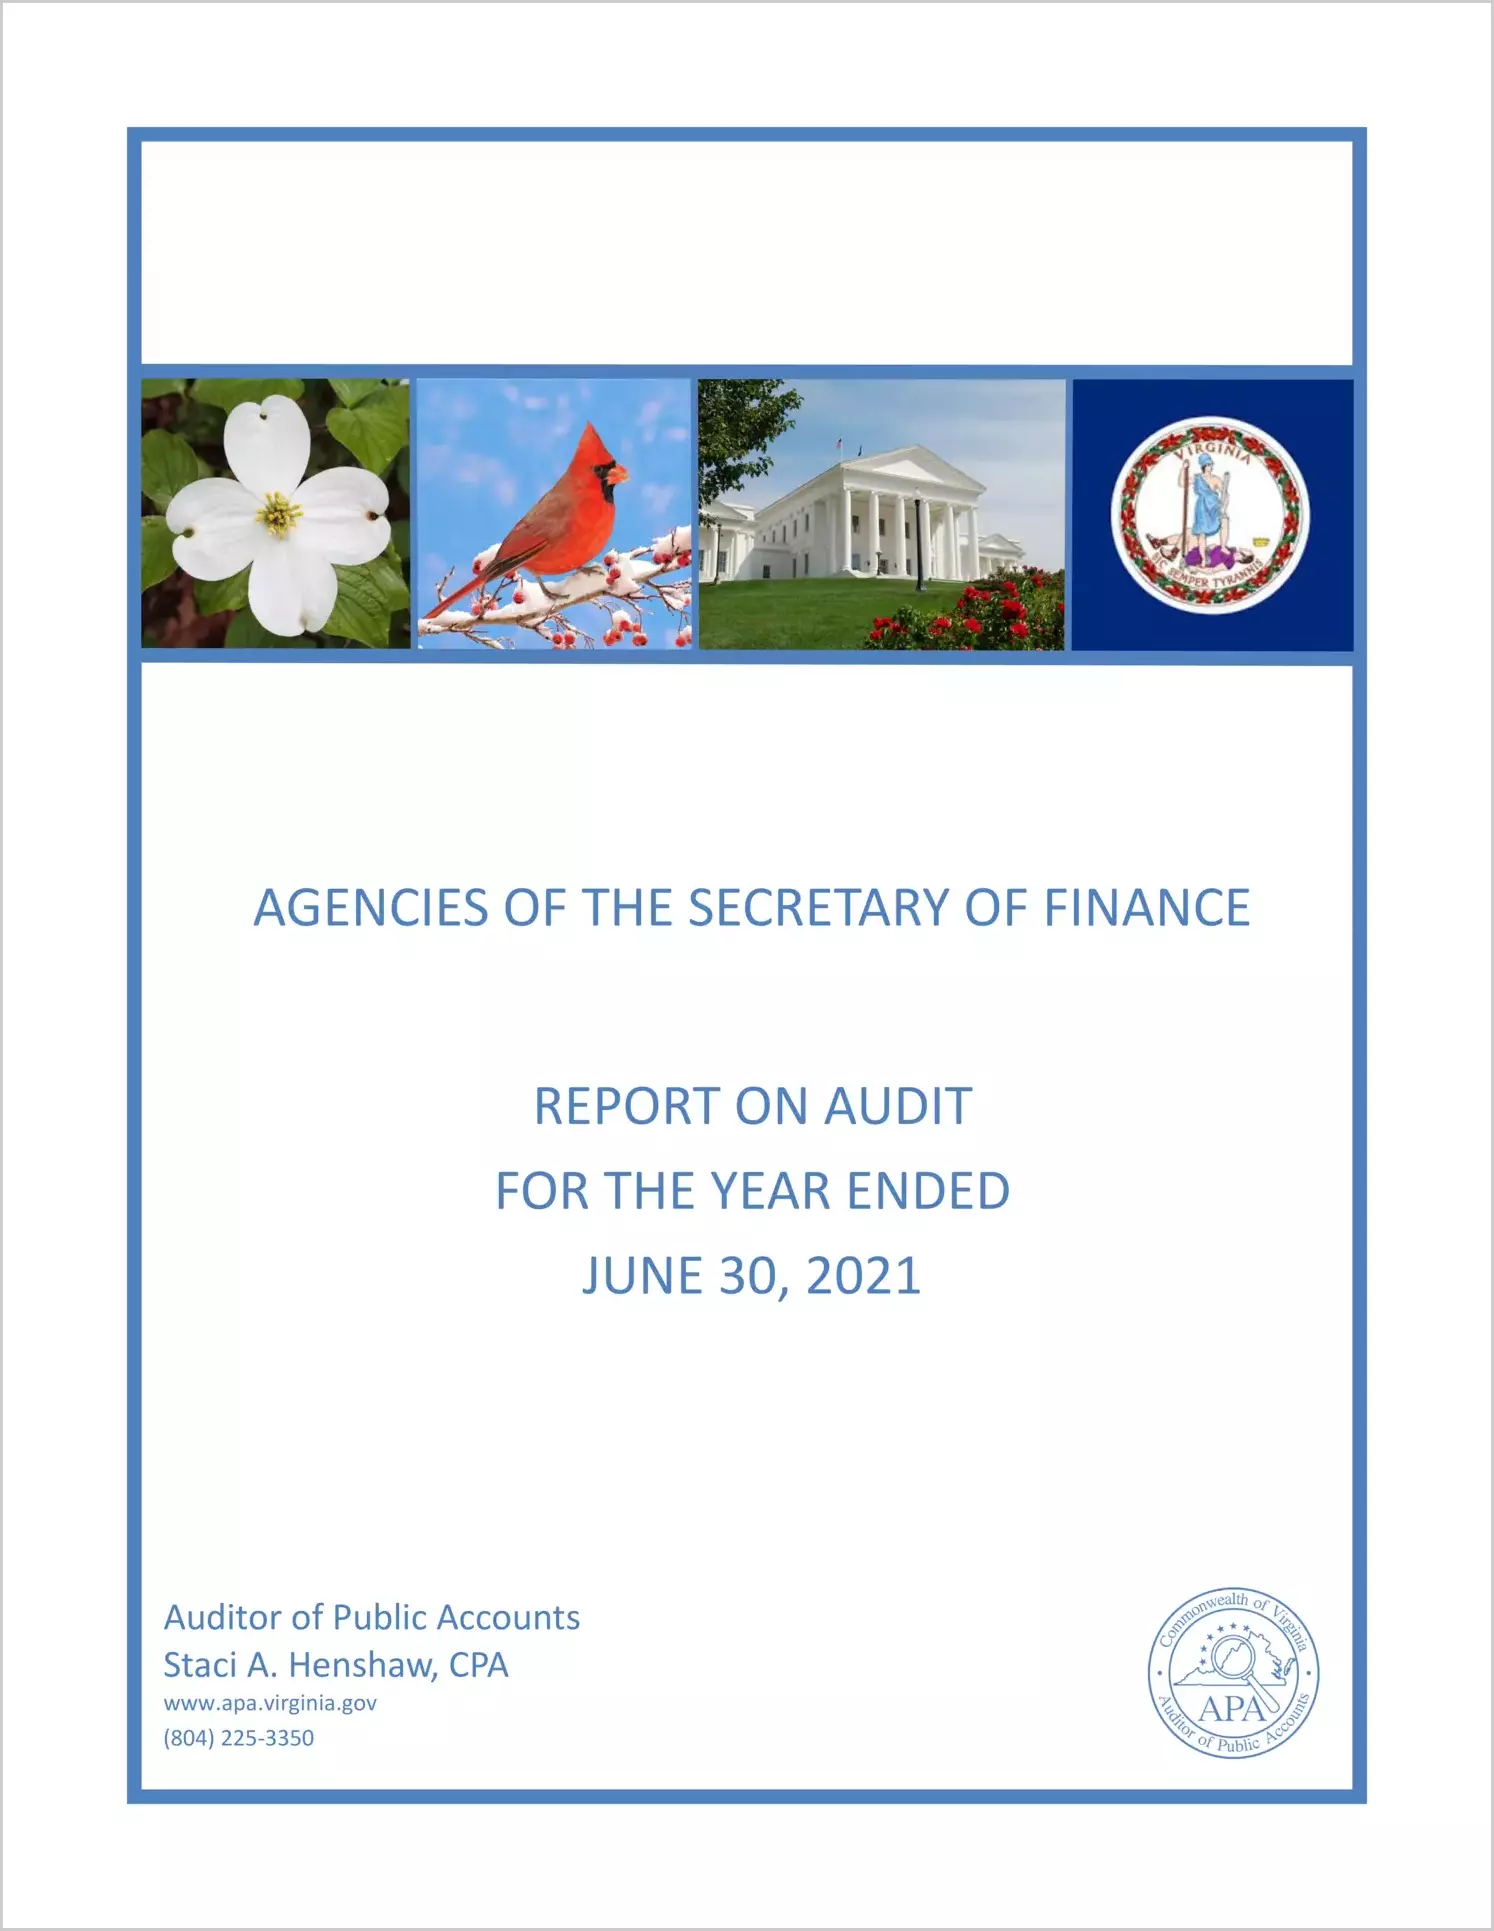 Agencies of the Secretary of Finance for the year ended June 30, 2021